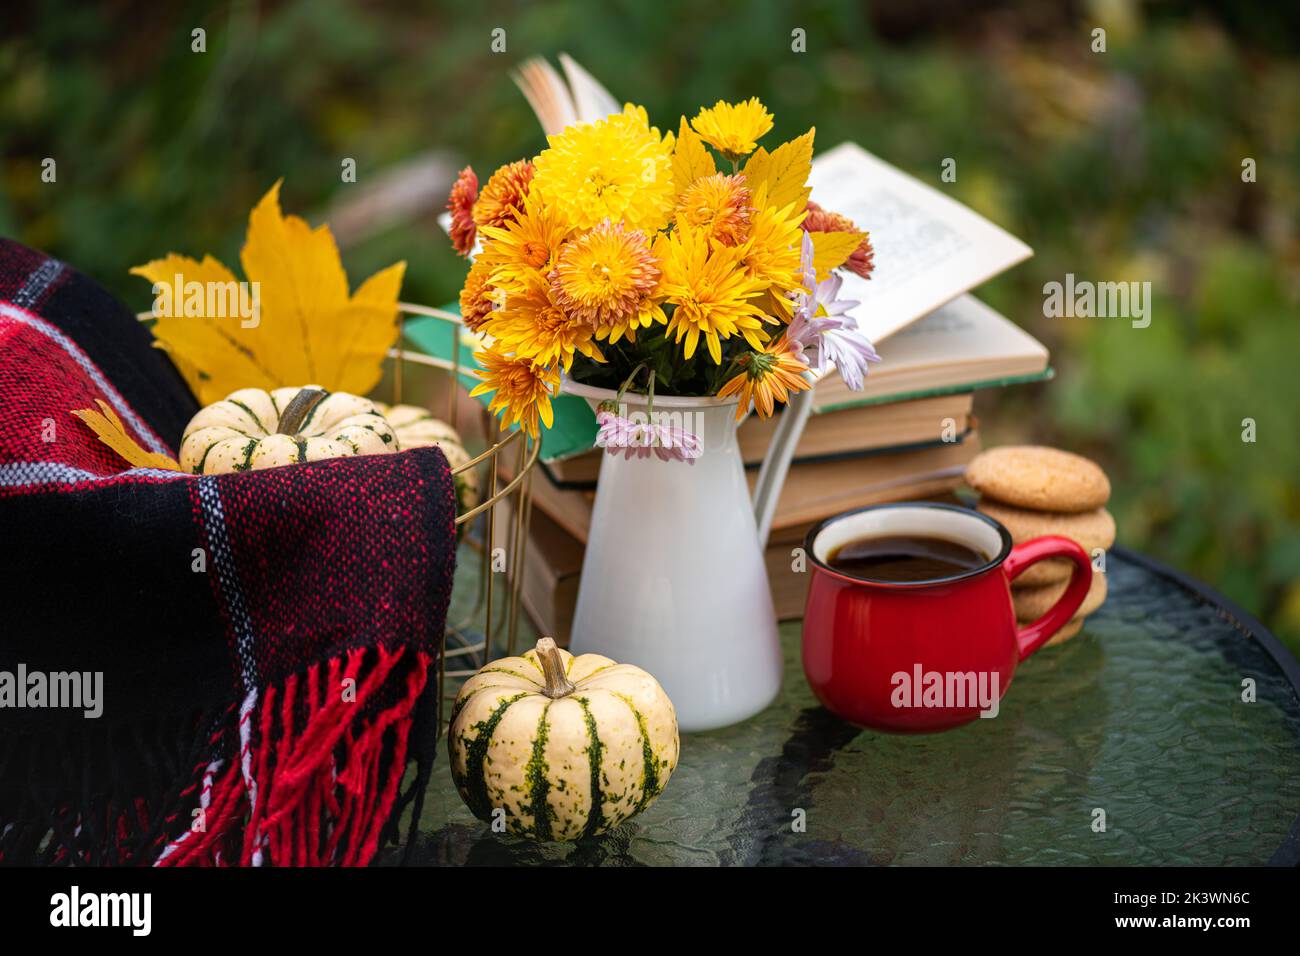 Bouquet of flowers, pumpkin, coffee cup, books on table in autumn garden. Rest in garden, reading books, breakfast, cozy in nature concept. Autumn tim Stock Photo